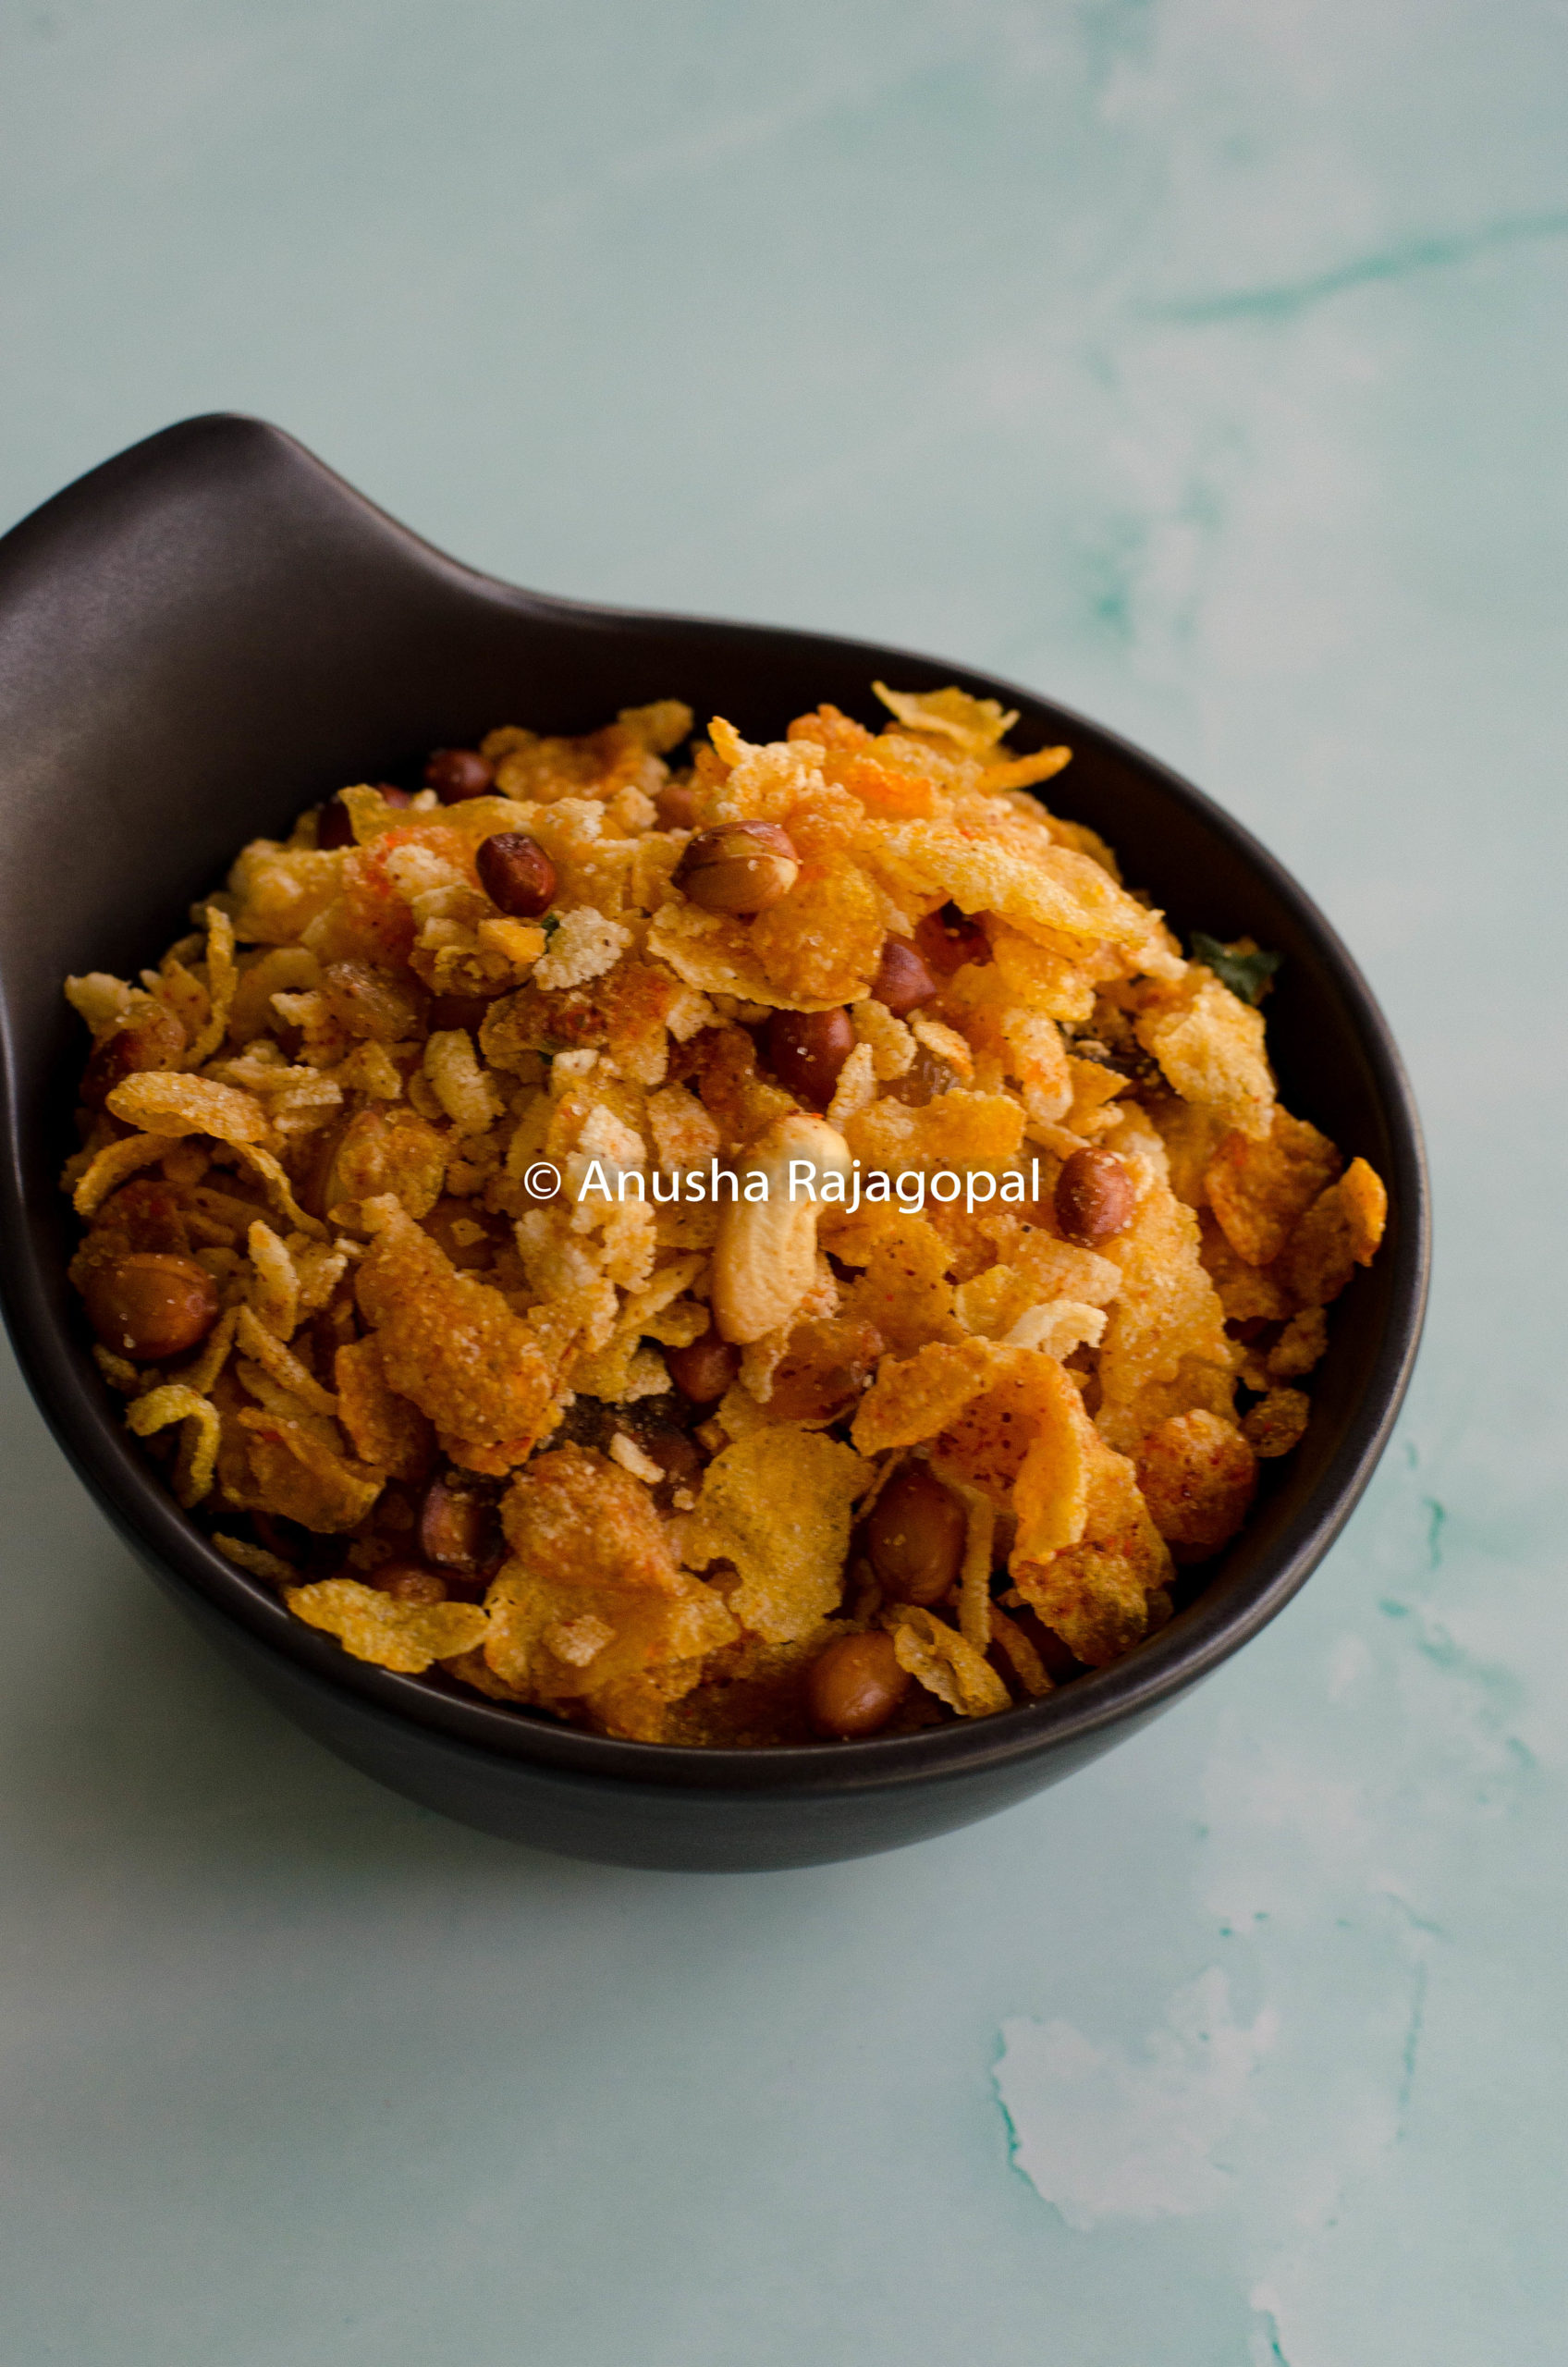 cornflakes mixture served in a black bowl against a pale blue background